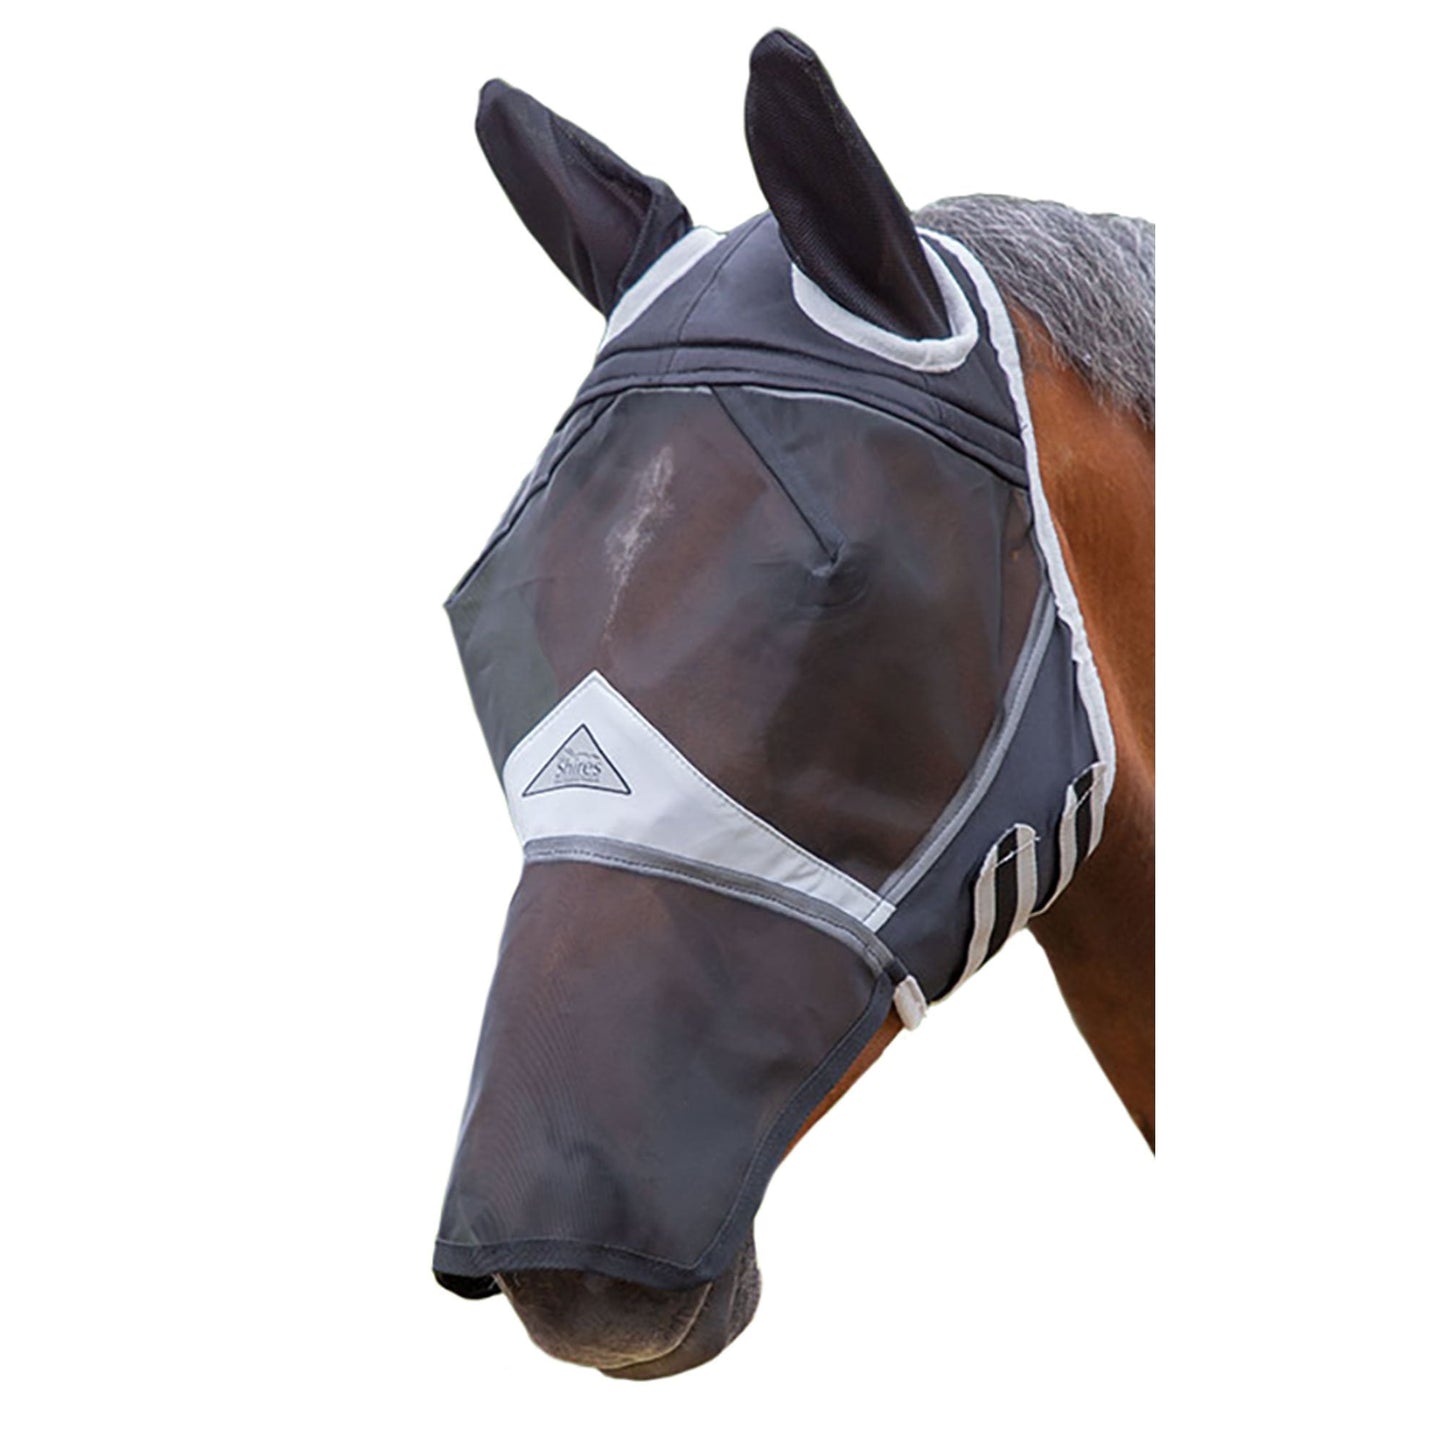 Shires Fine Mesh fly mask with nose and ears